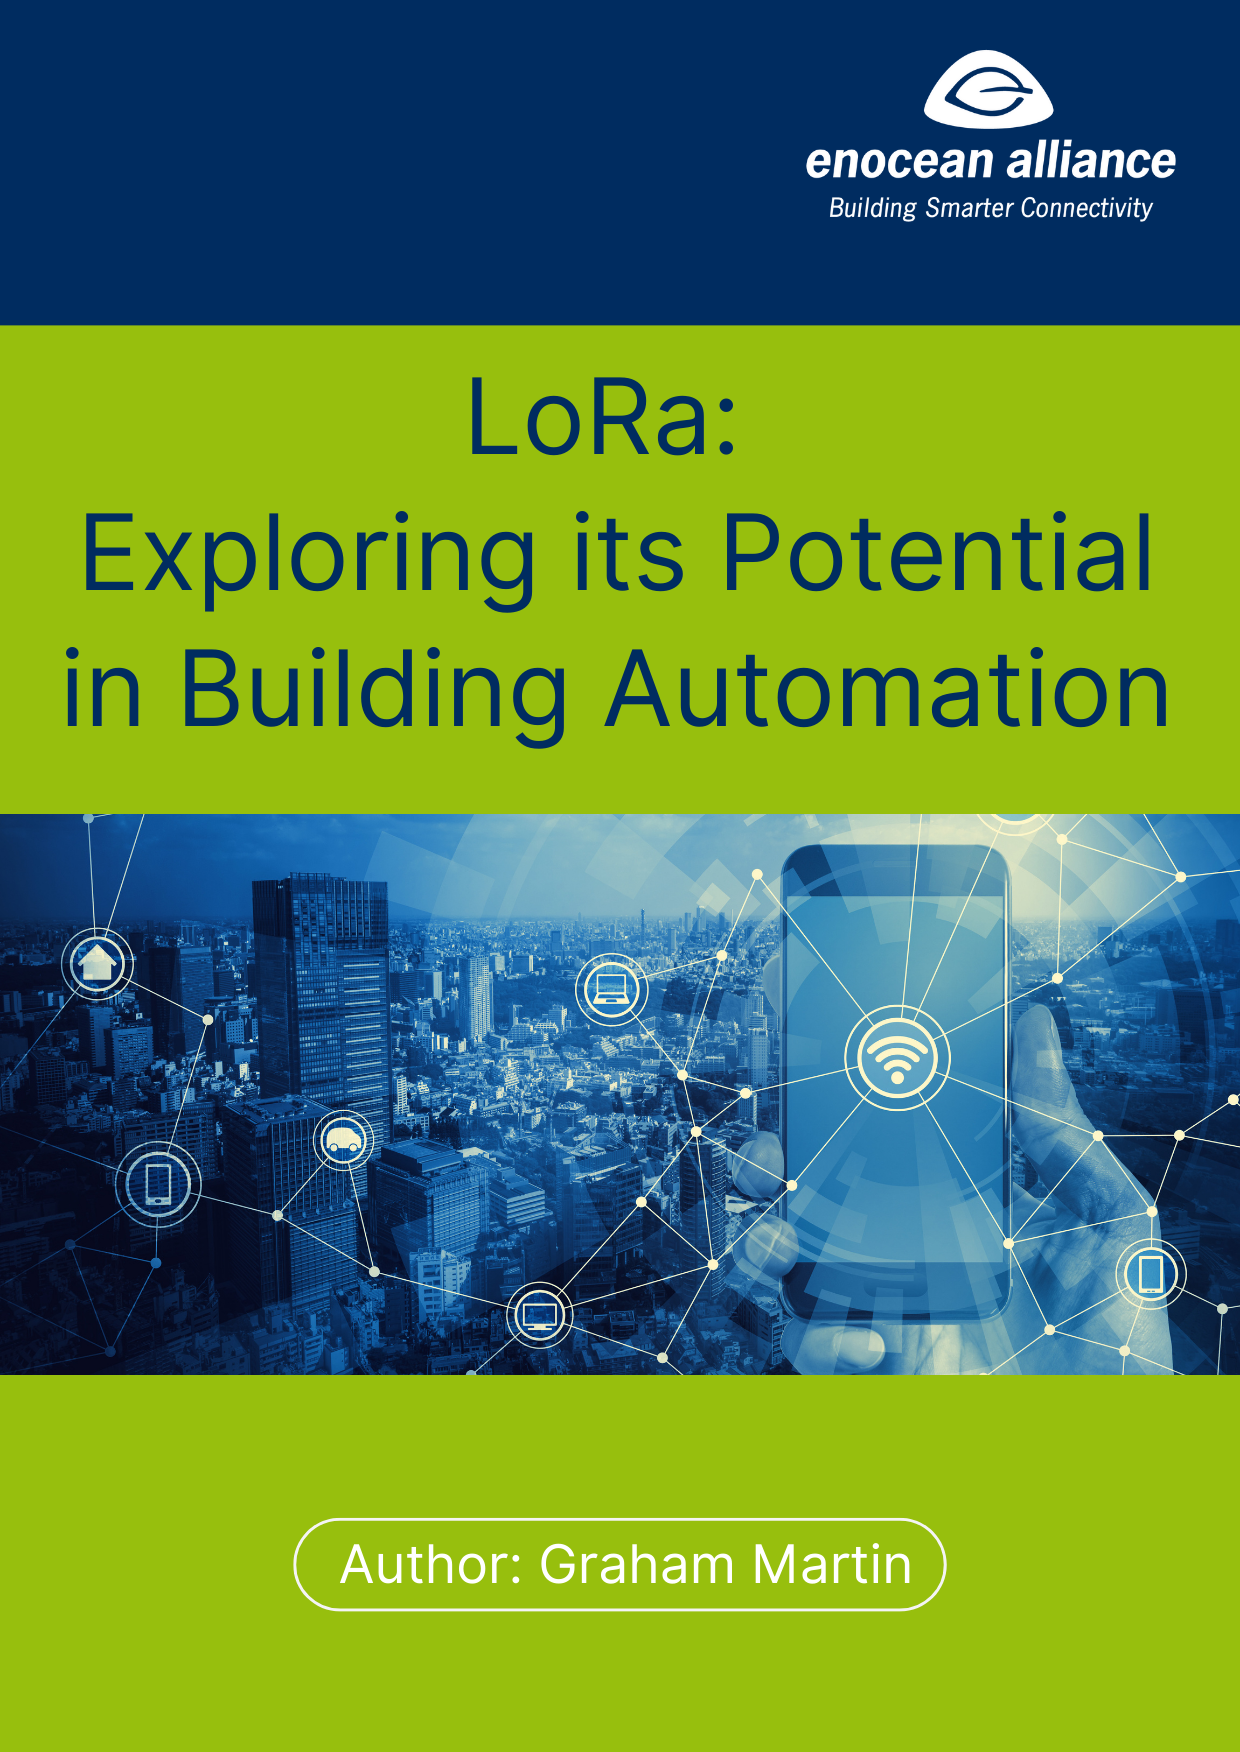 Long Range Wireless Technology consideration for implementation in building automation and control applications